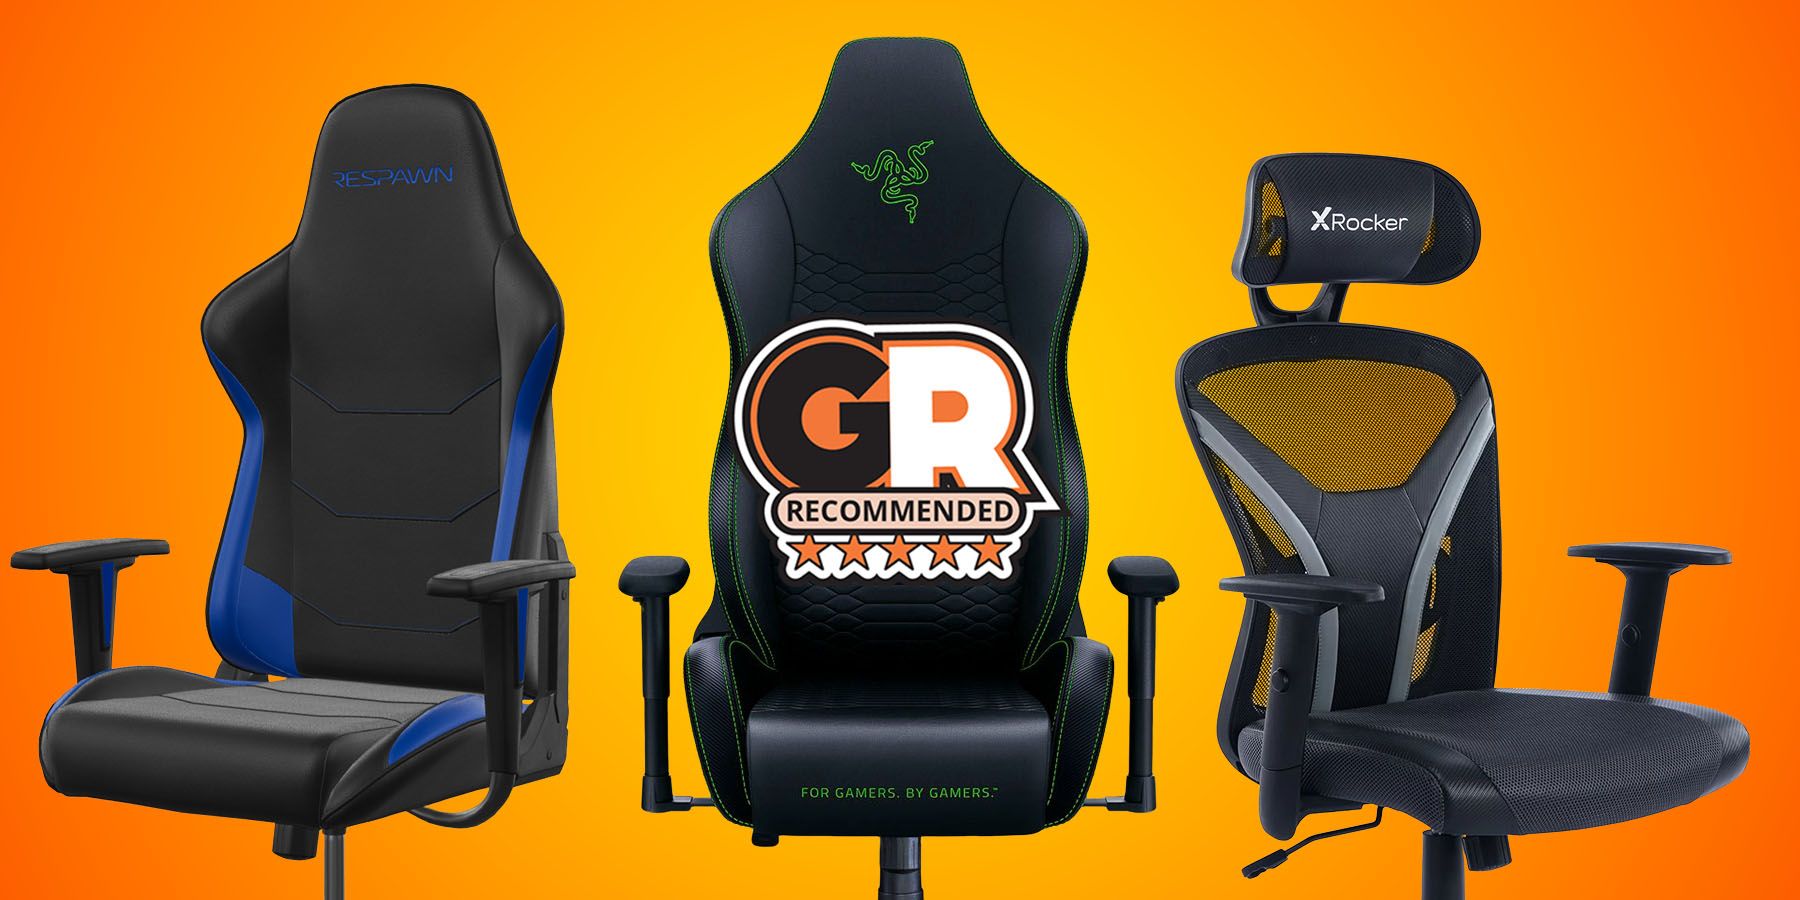 The Best Budget Gaming Chairs in 2023